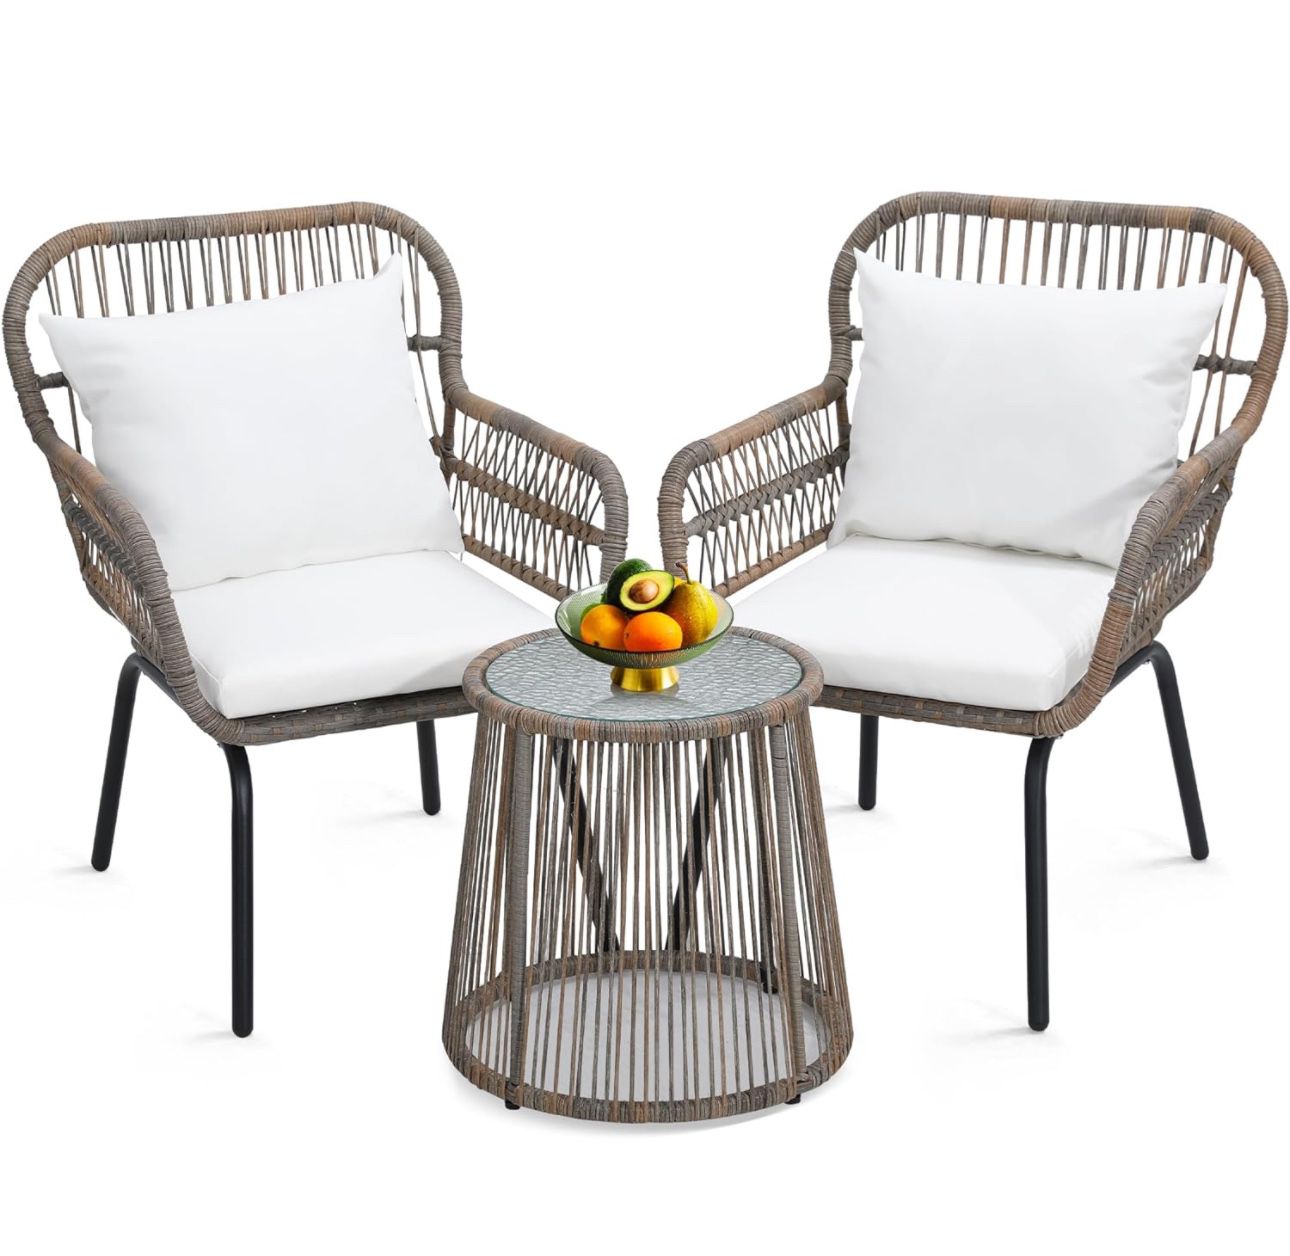 3 Pieces Rattan Wicker Bistro Set, Outdoor Conversation Set, Wicker Furniture Set with Glass Top Table, Space Saving for Balcony, Backyard, Natural